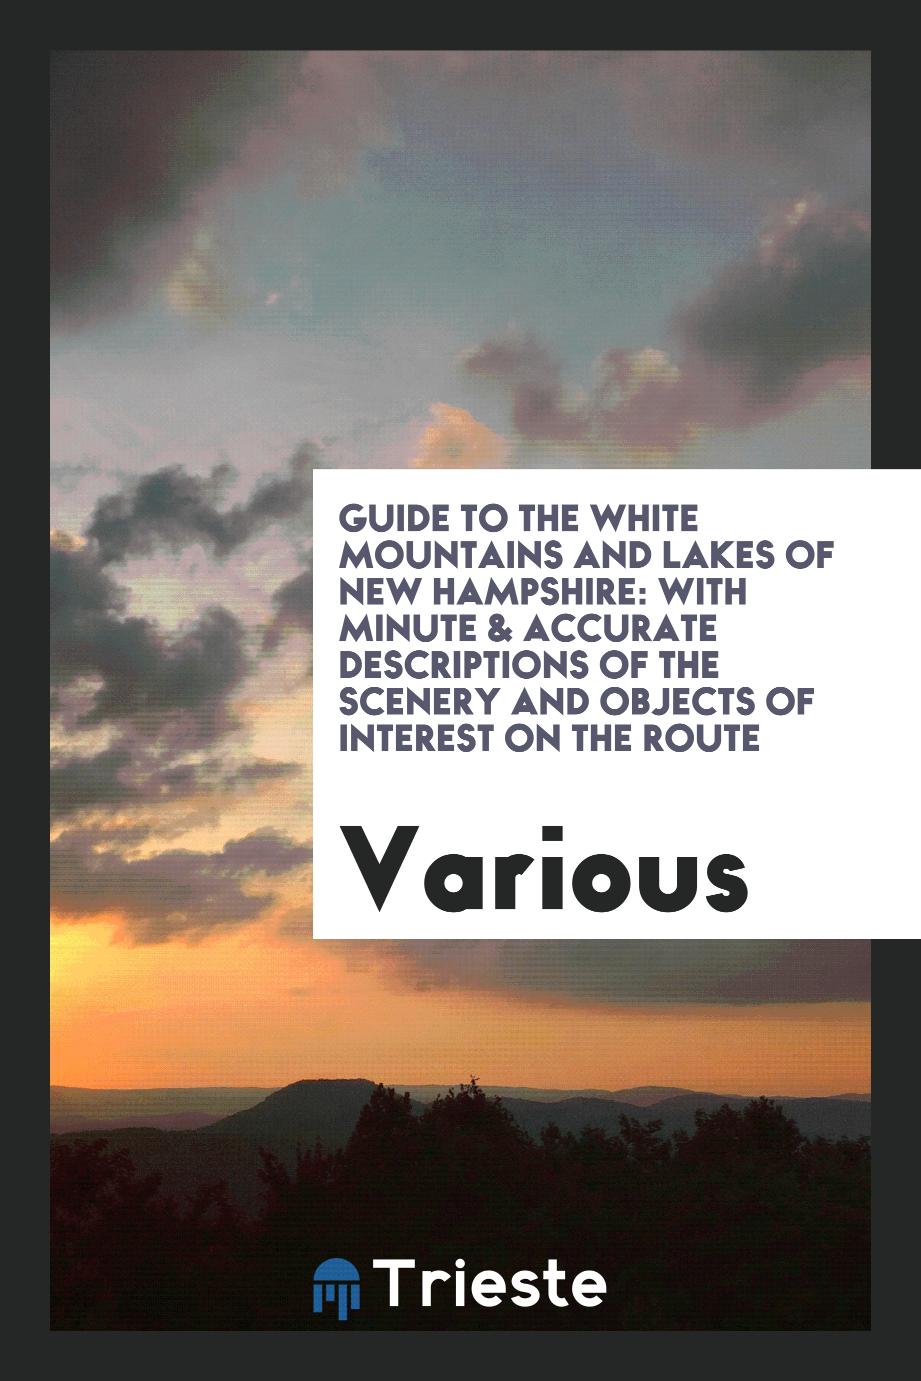 Guide to the White Mountains and Lakes of New Hampshire: With Minute & Accurate Descriptions of the Scenery and Objects of Interest on the Route